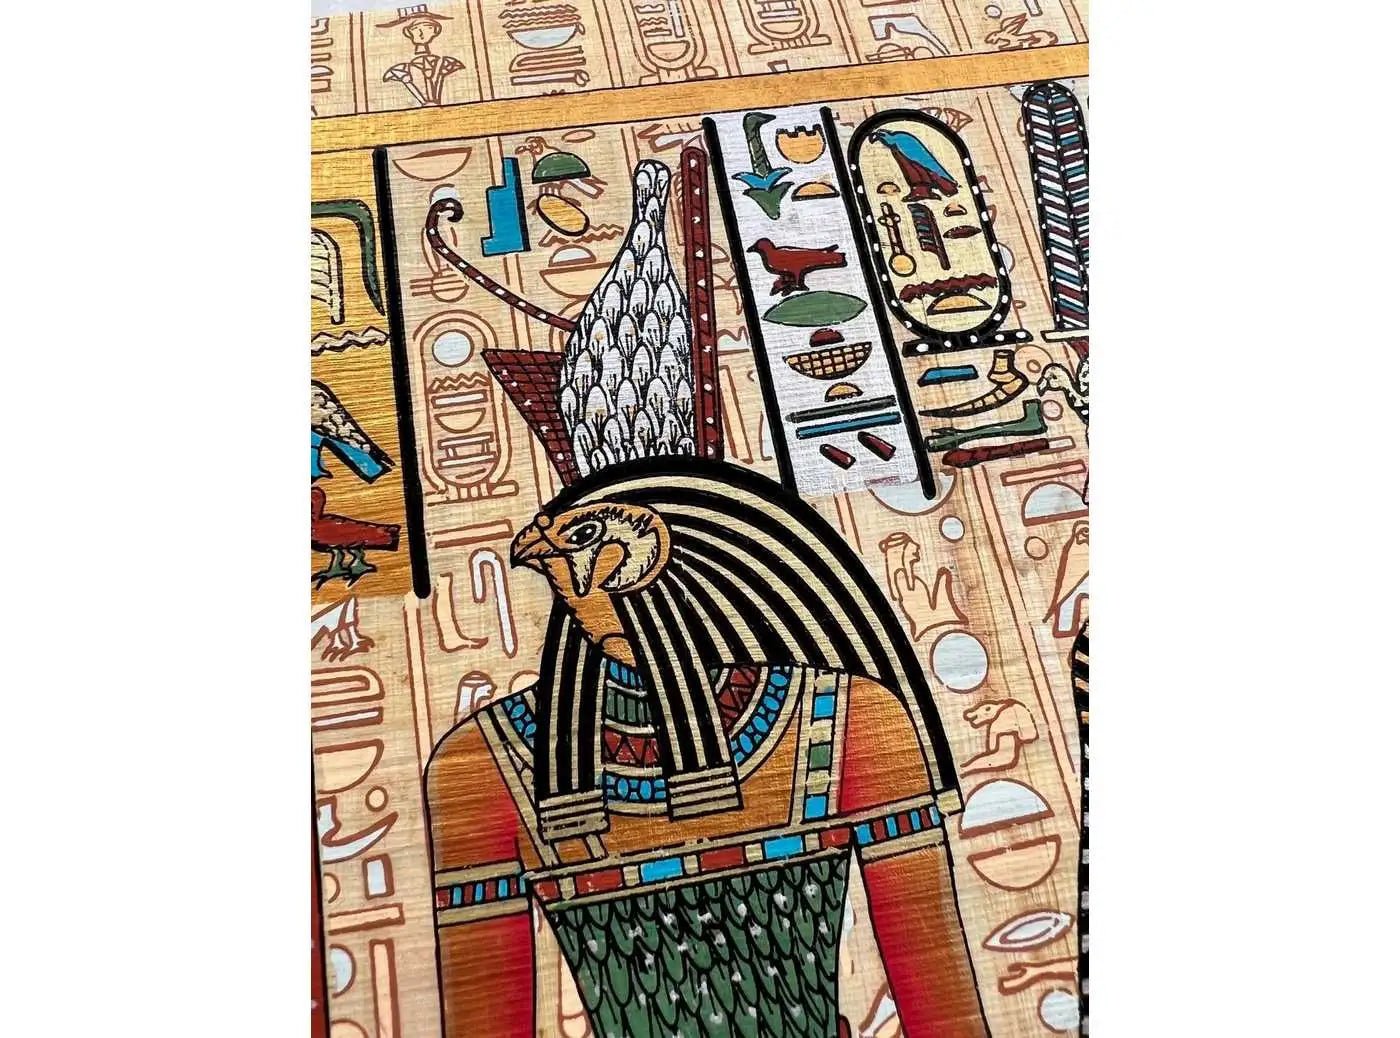 Queen Nefertari Being Lead by God Horus Into the After Life - Frameable Handmade Egypt Papyrus - Ancient Egyptian Art - 13x17 Inches